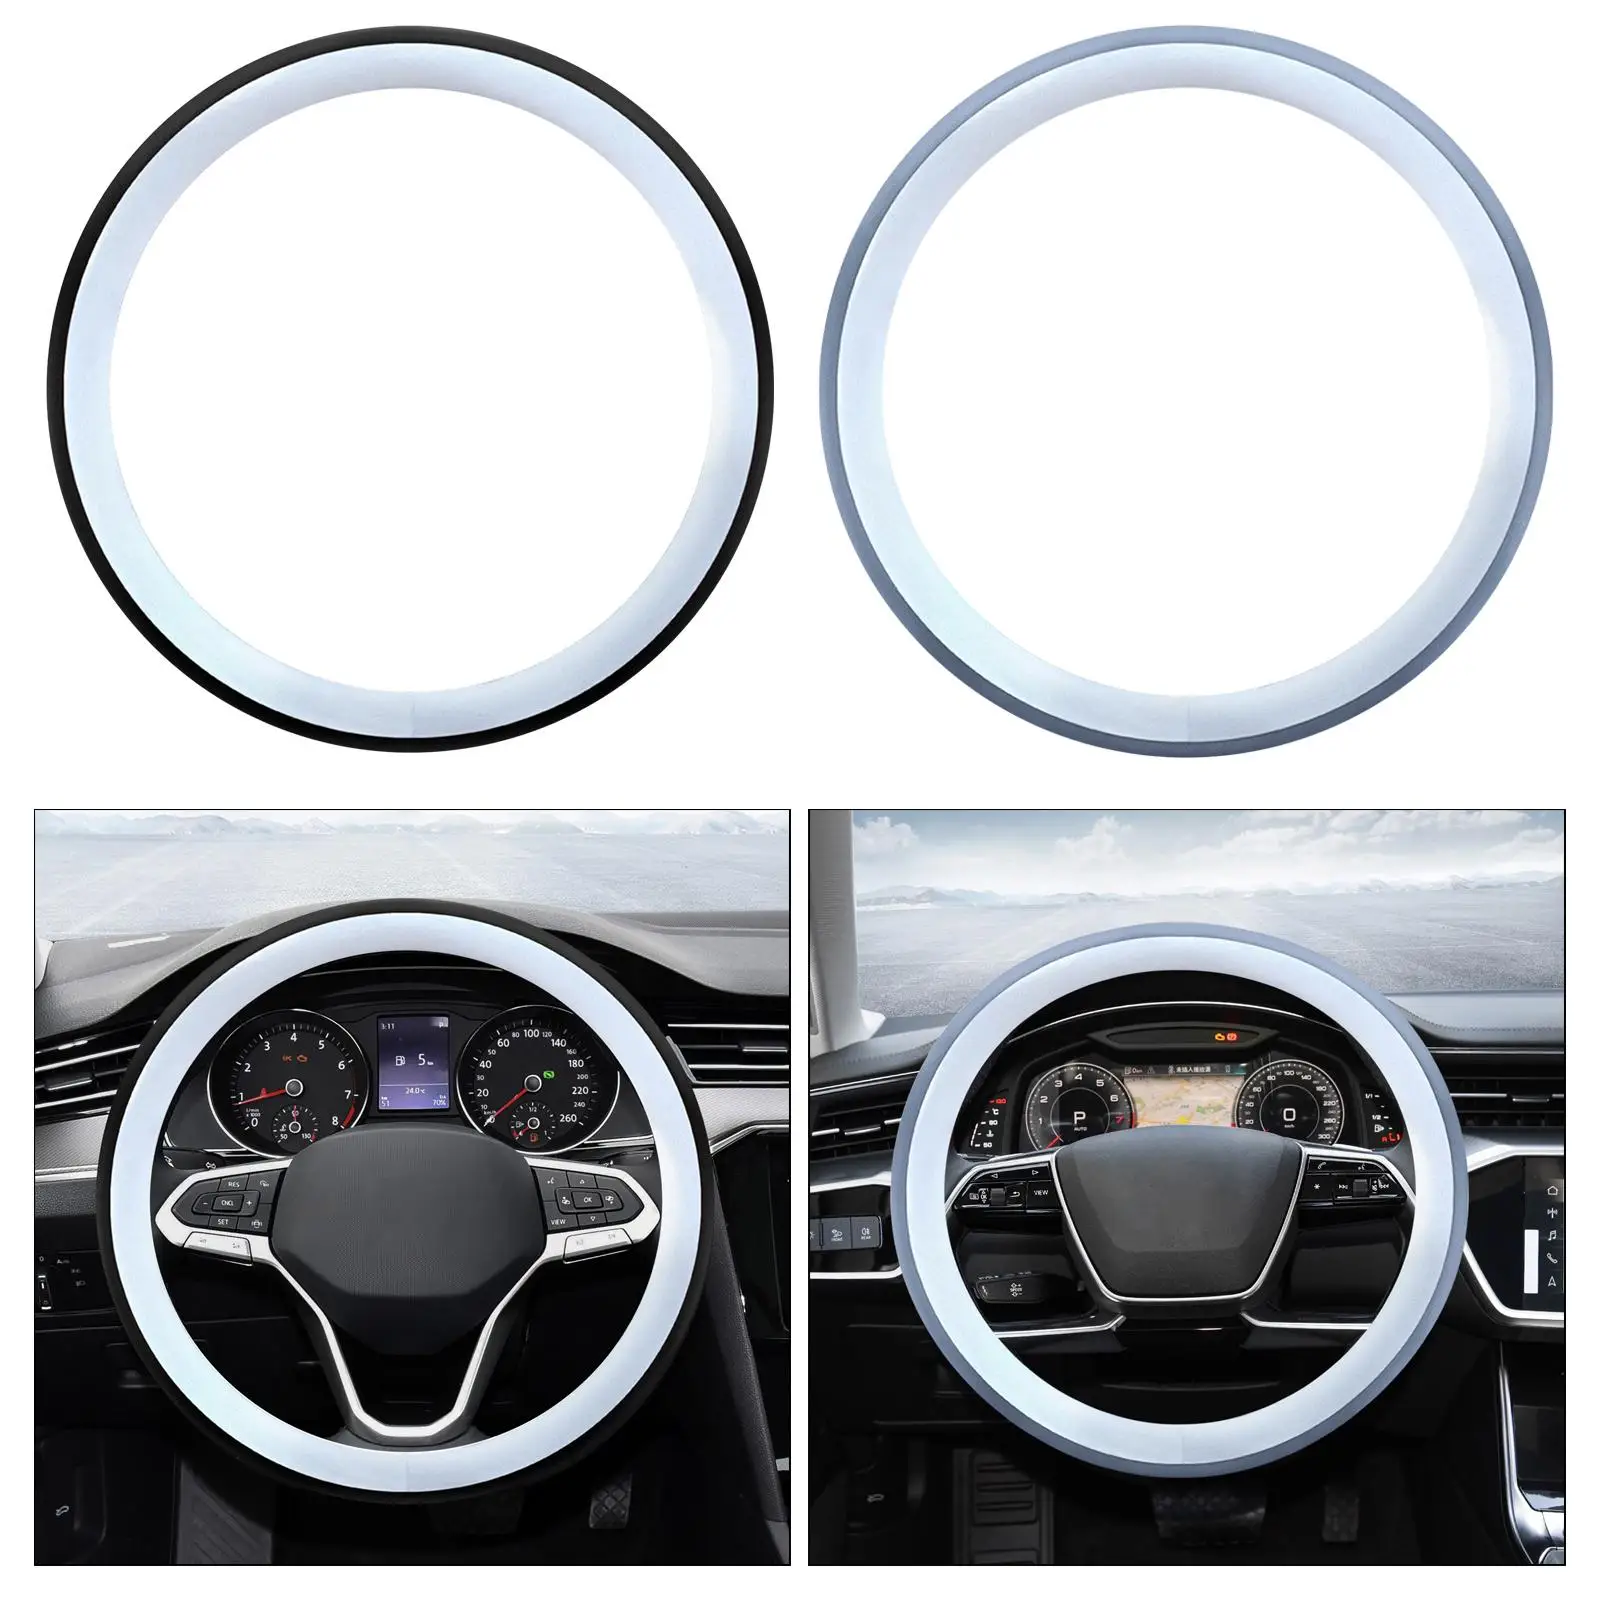 15inch Car Steering Wheel Cover Comfortable Warm Winter Easily Install Wear Resistant Protection Protective Cover Soft Plush